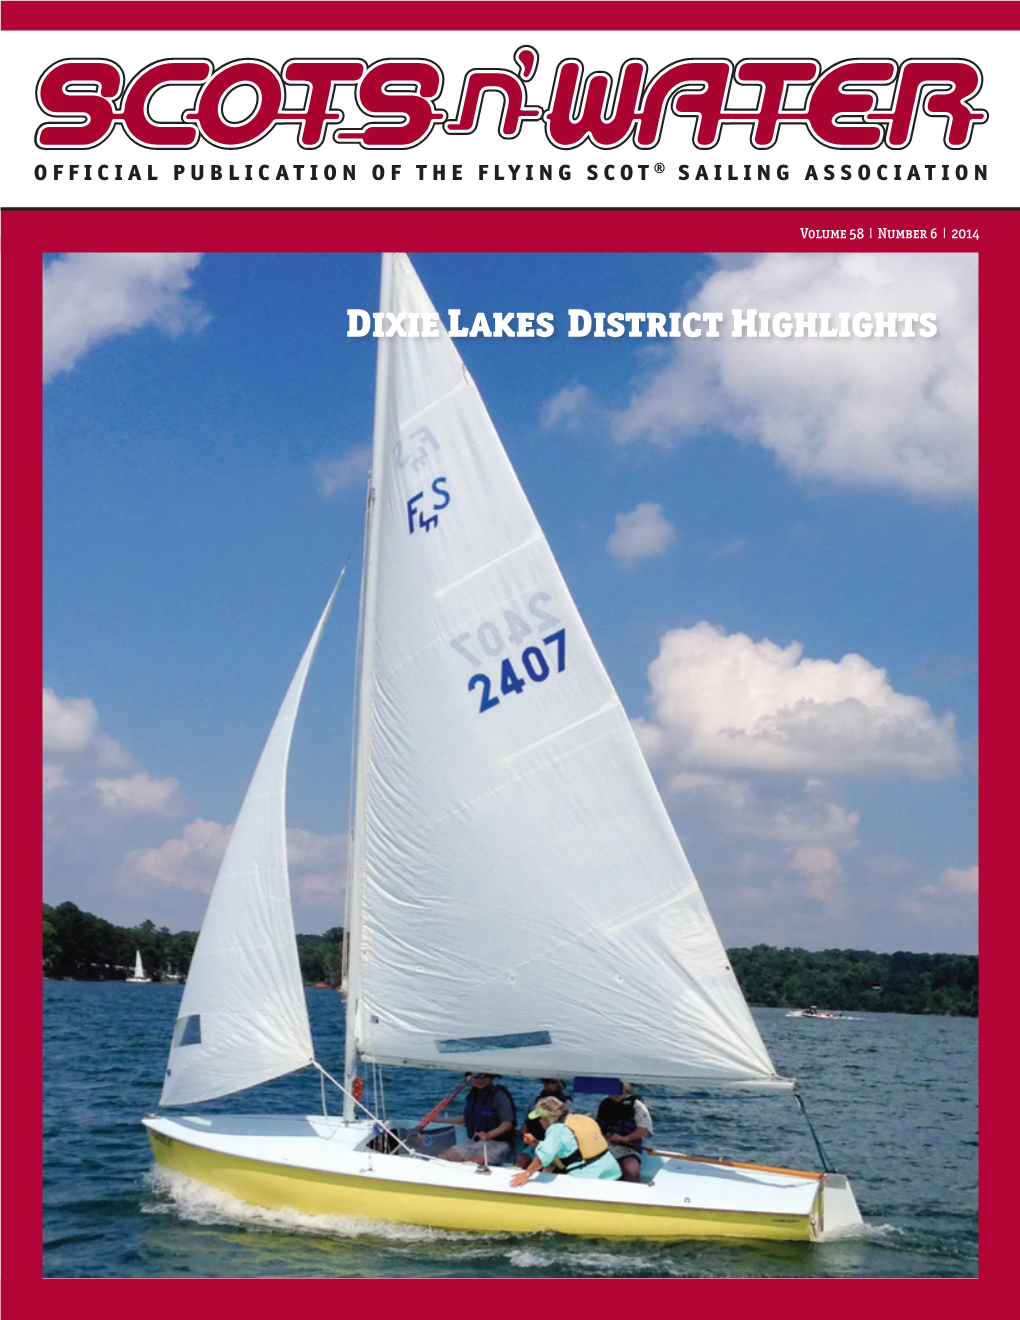 Dixie Lakes District Highlights 2014 North Americans *,3,4,5,7,8 1,2 Great Customers